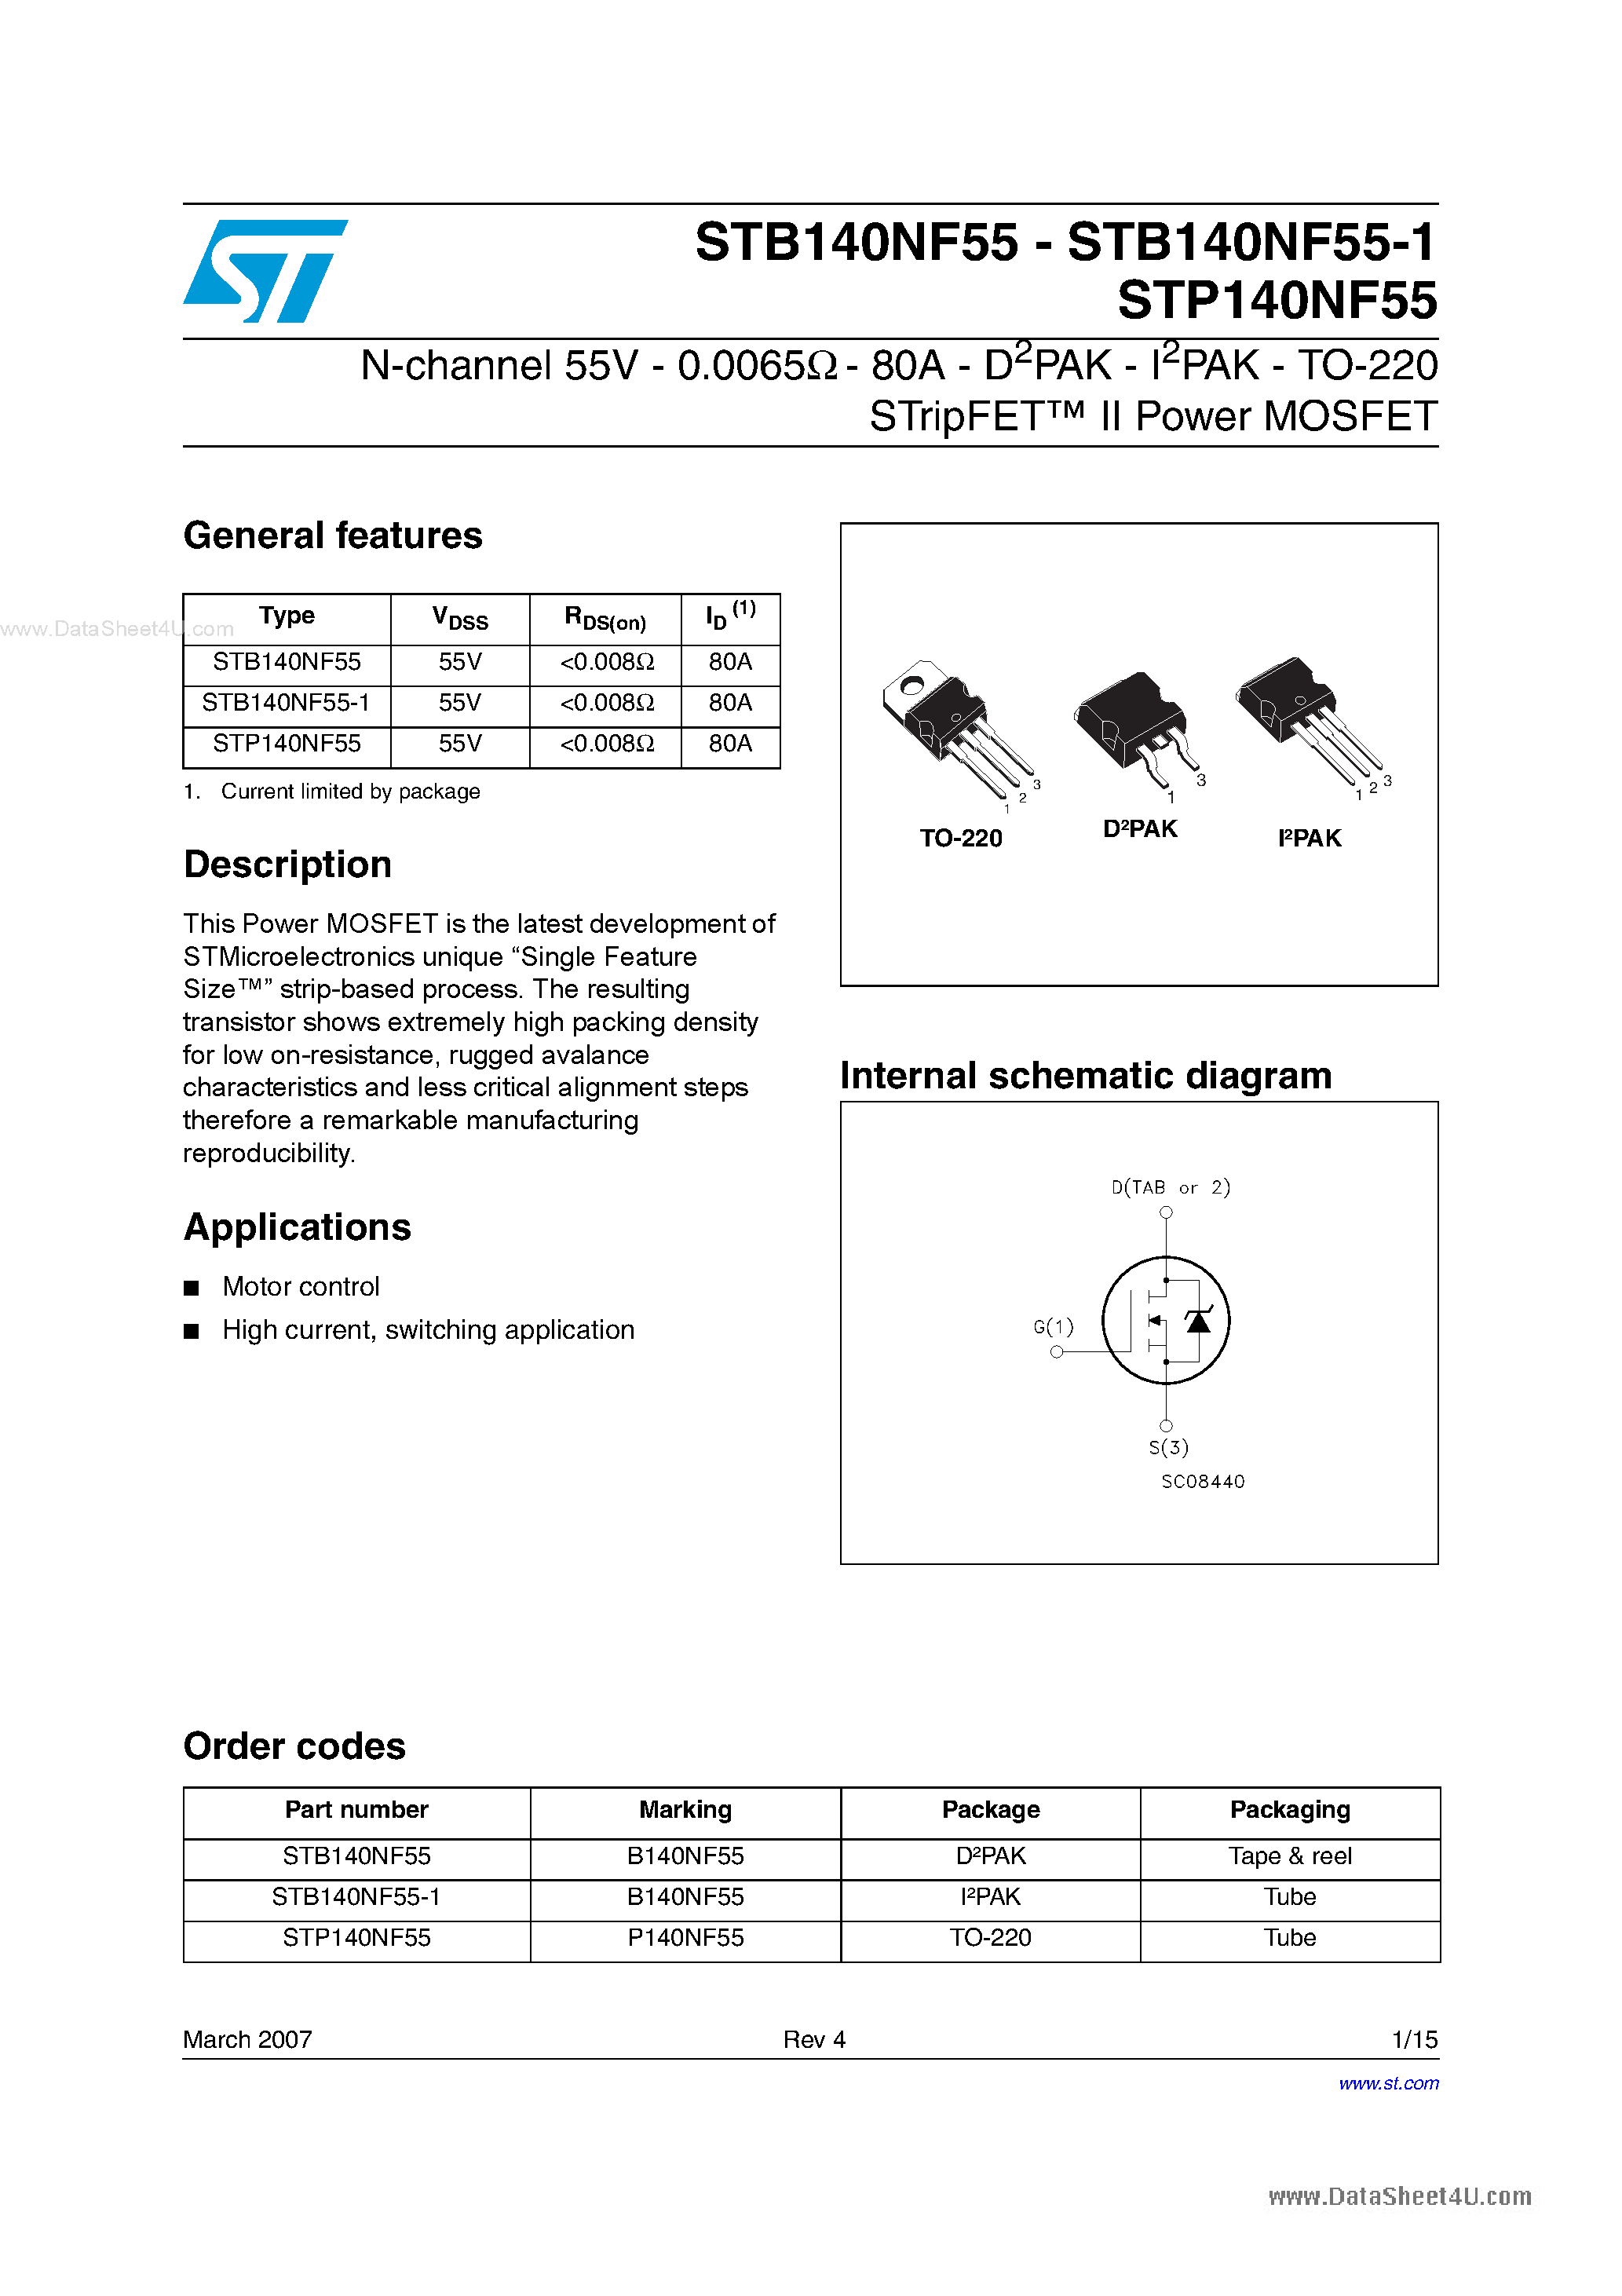 Datasheet P140NF55 - Search -----> STP140NF55 page 1